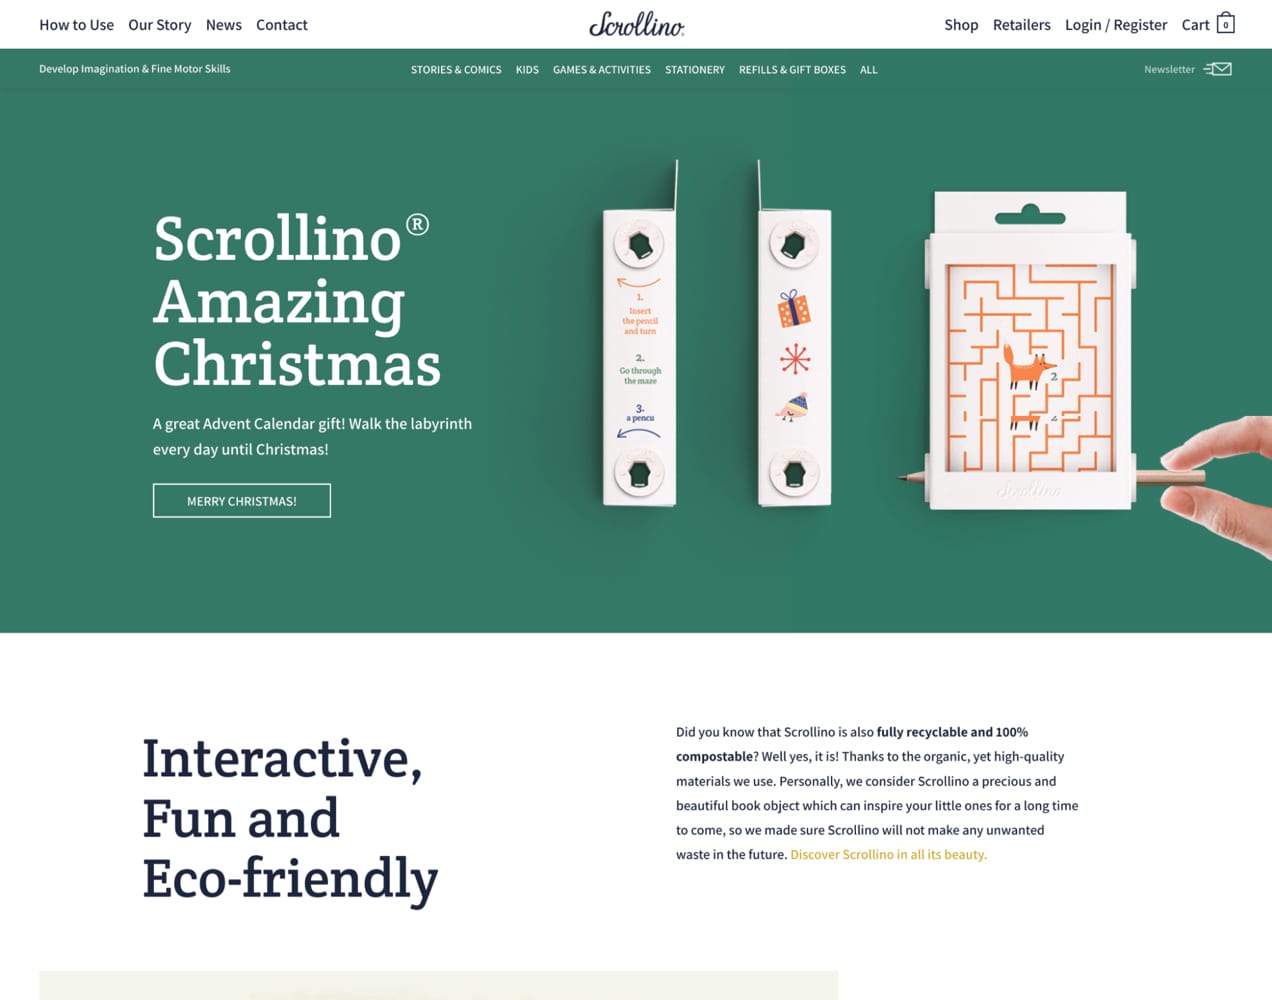 Scrollino website with unique fonts